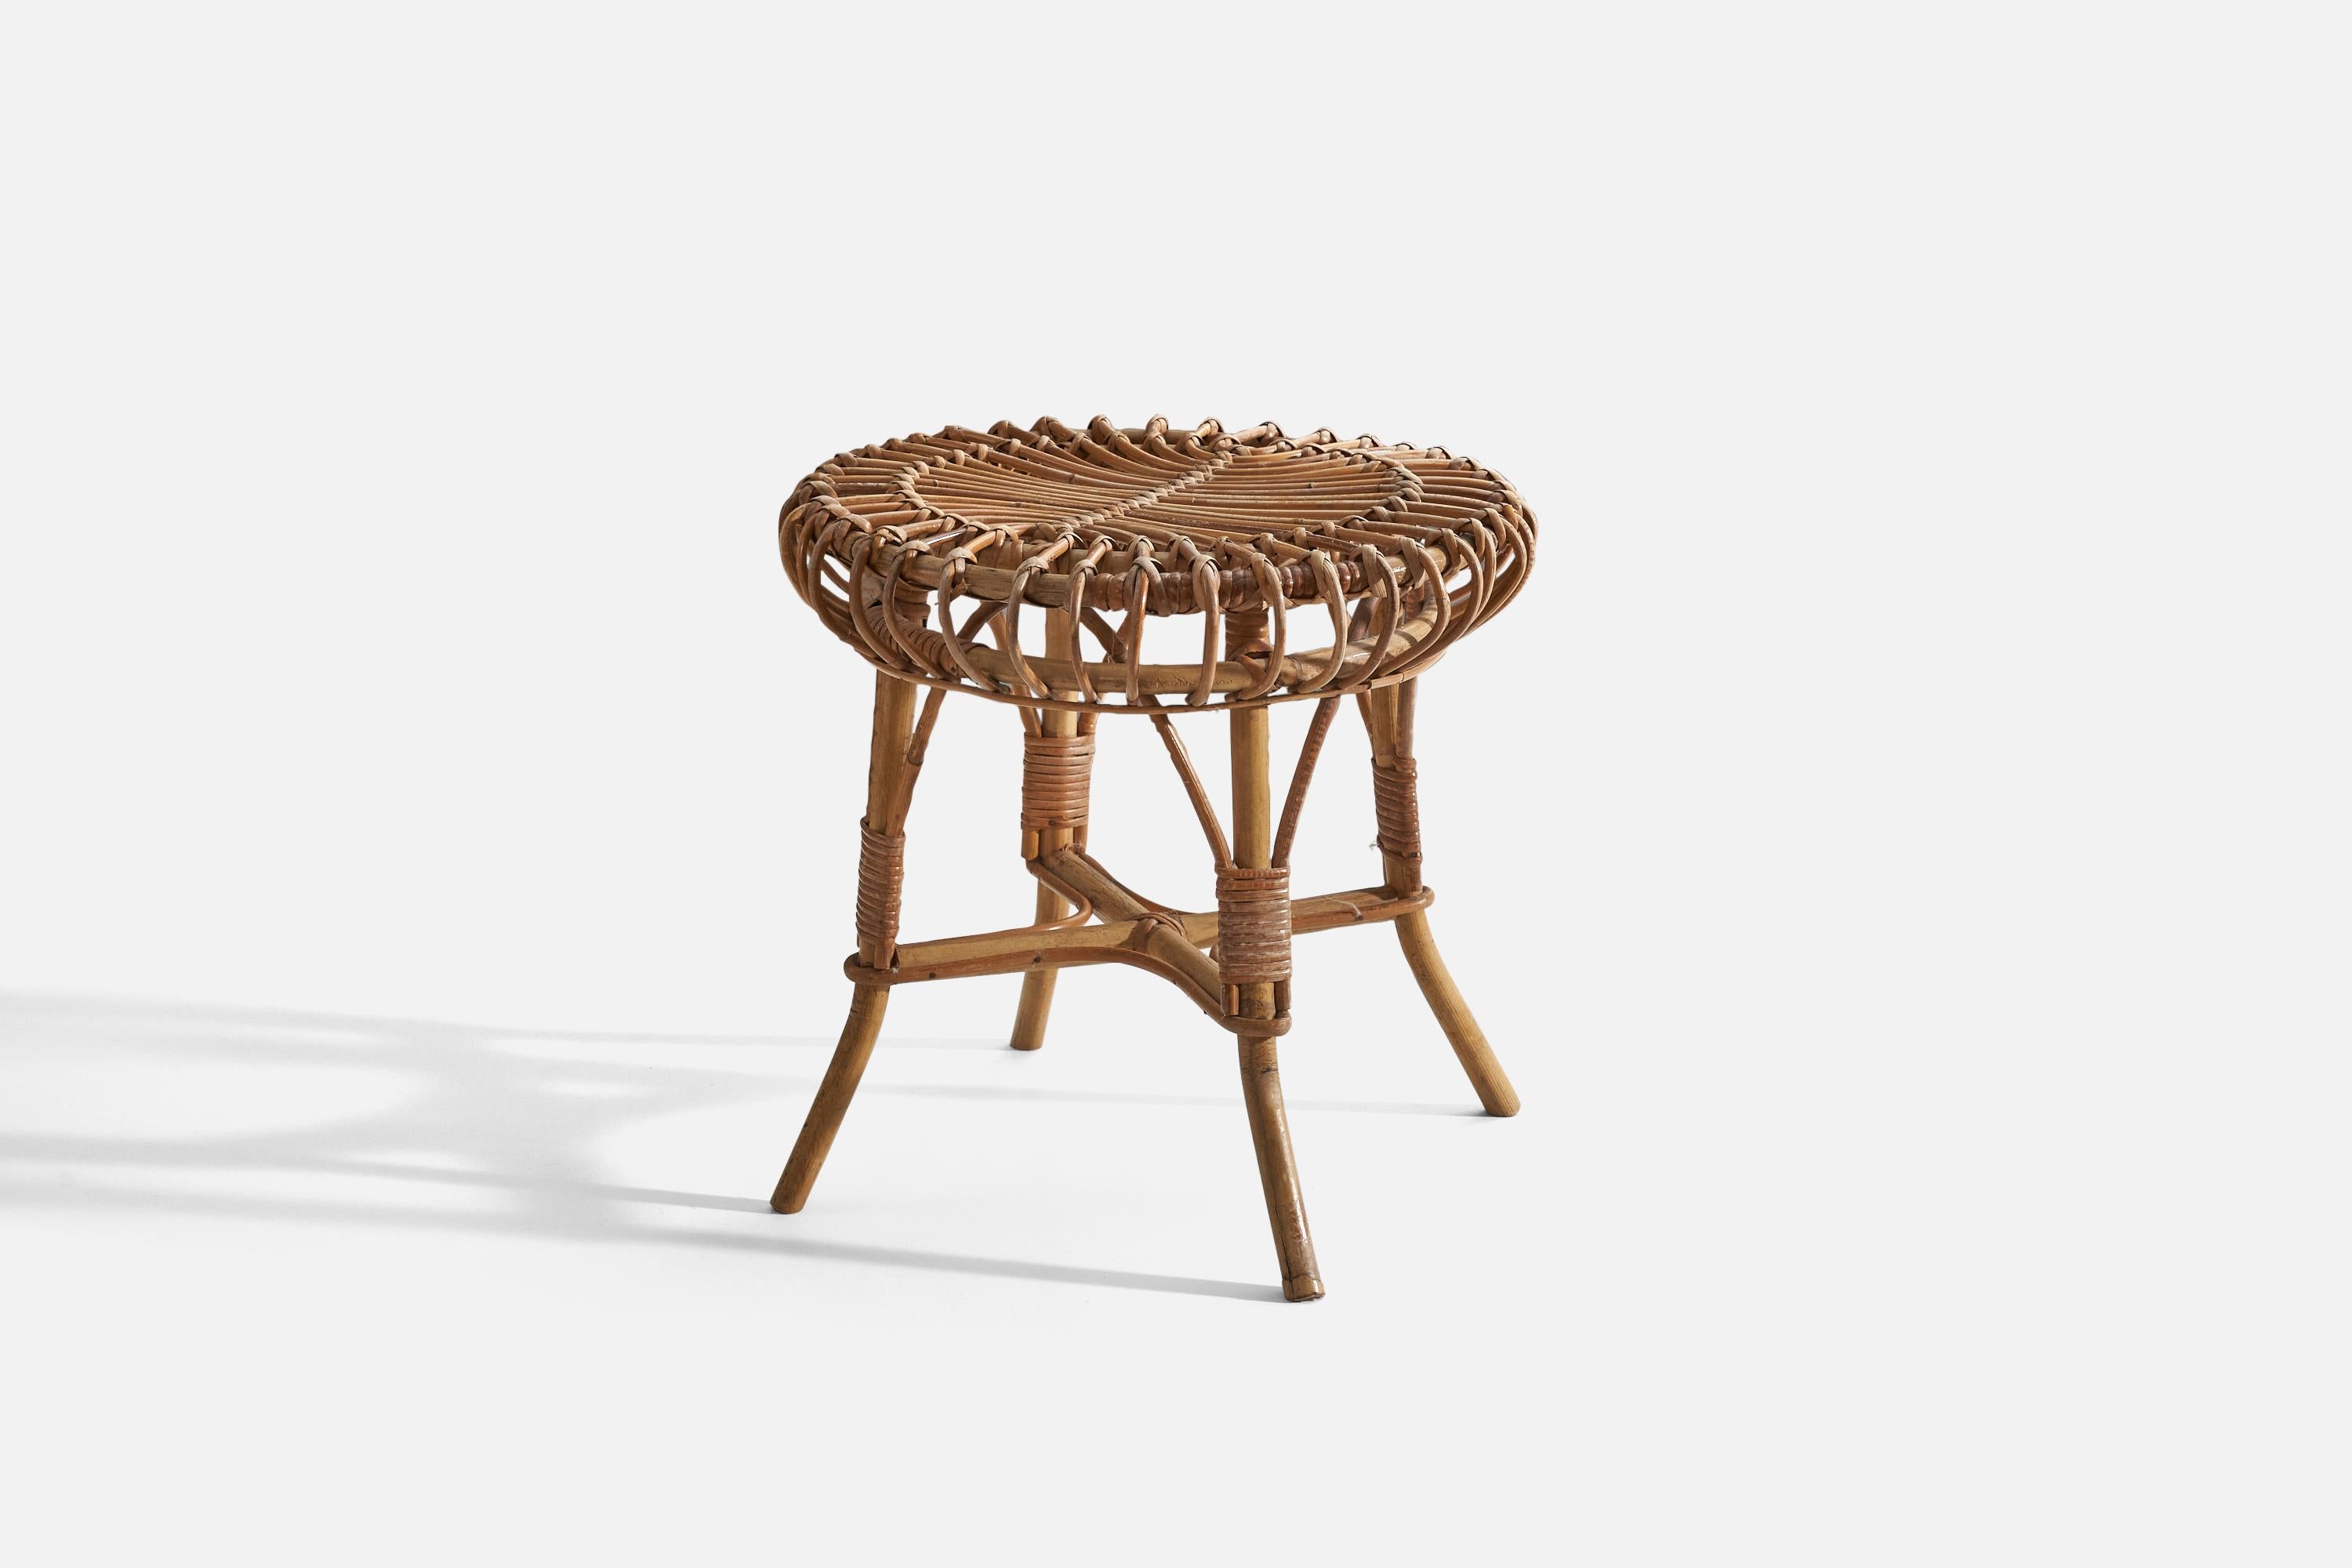 A rattan stool designed and produced in Italy, c. 1950s. 

